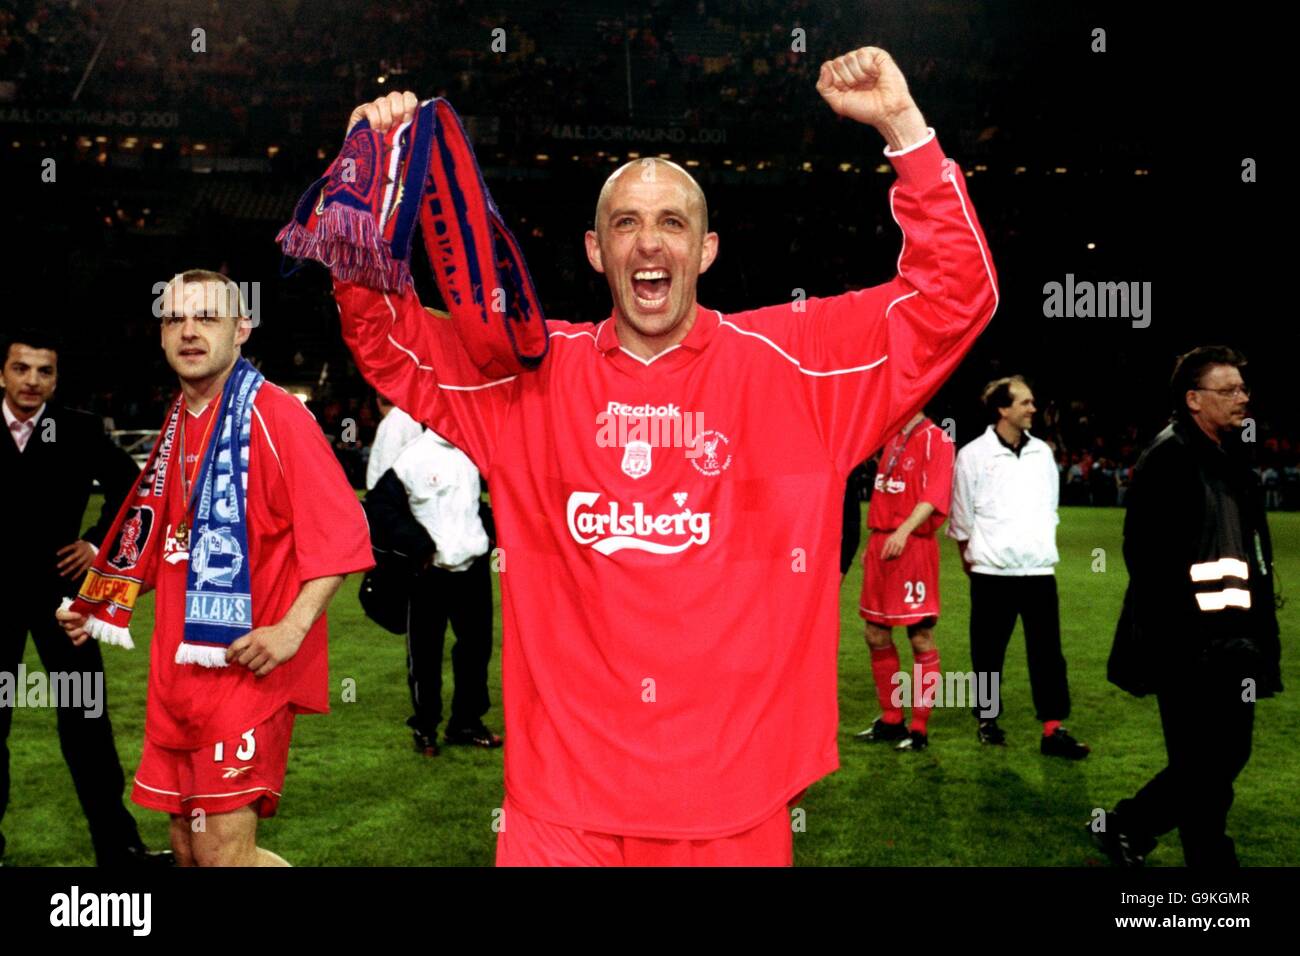 Soccer - UEFA Cup - Final - v Alaves. Liverpool's Gary celebrates winning the cup Stock Photo - Alamy